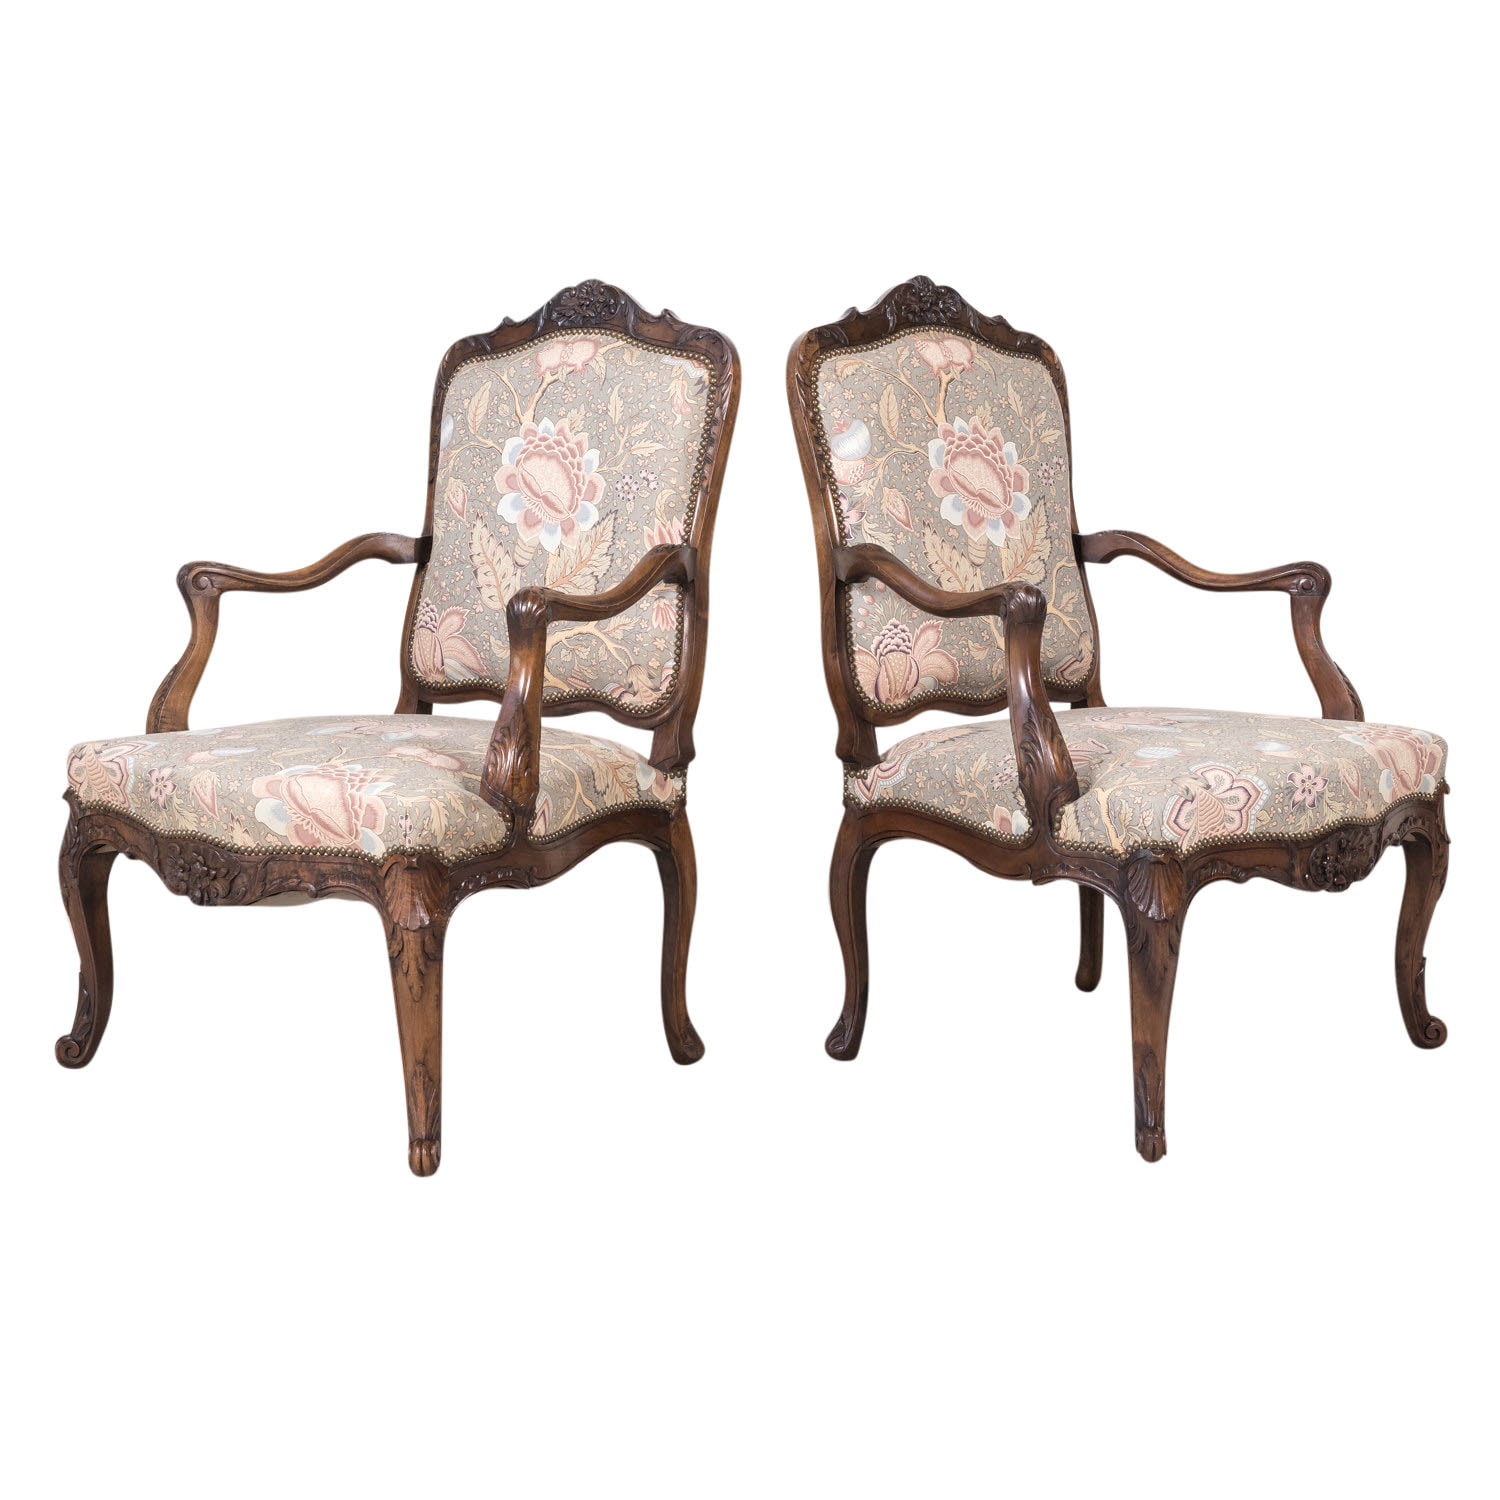 Encore Furniture Gallery-French Louis XV Hand Carved Double